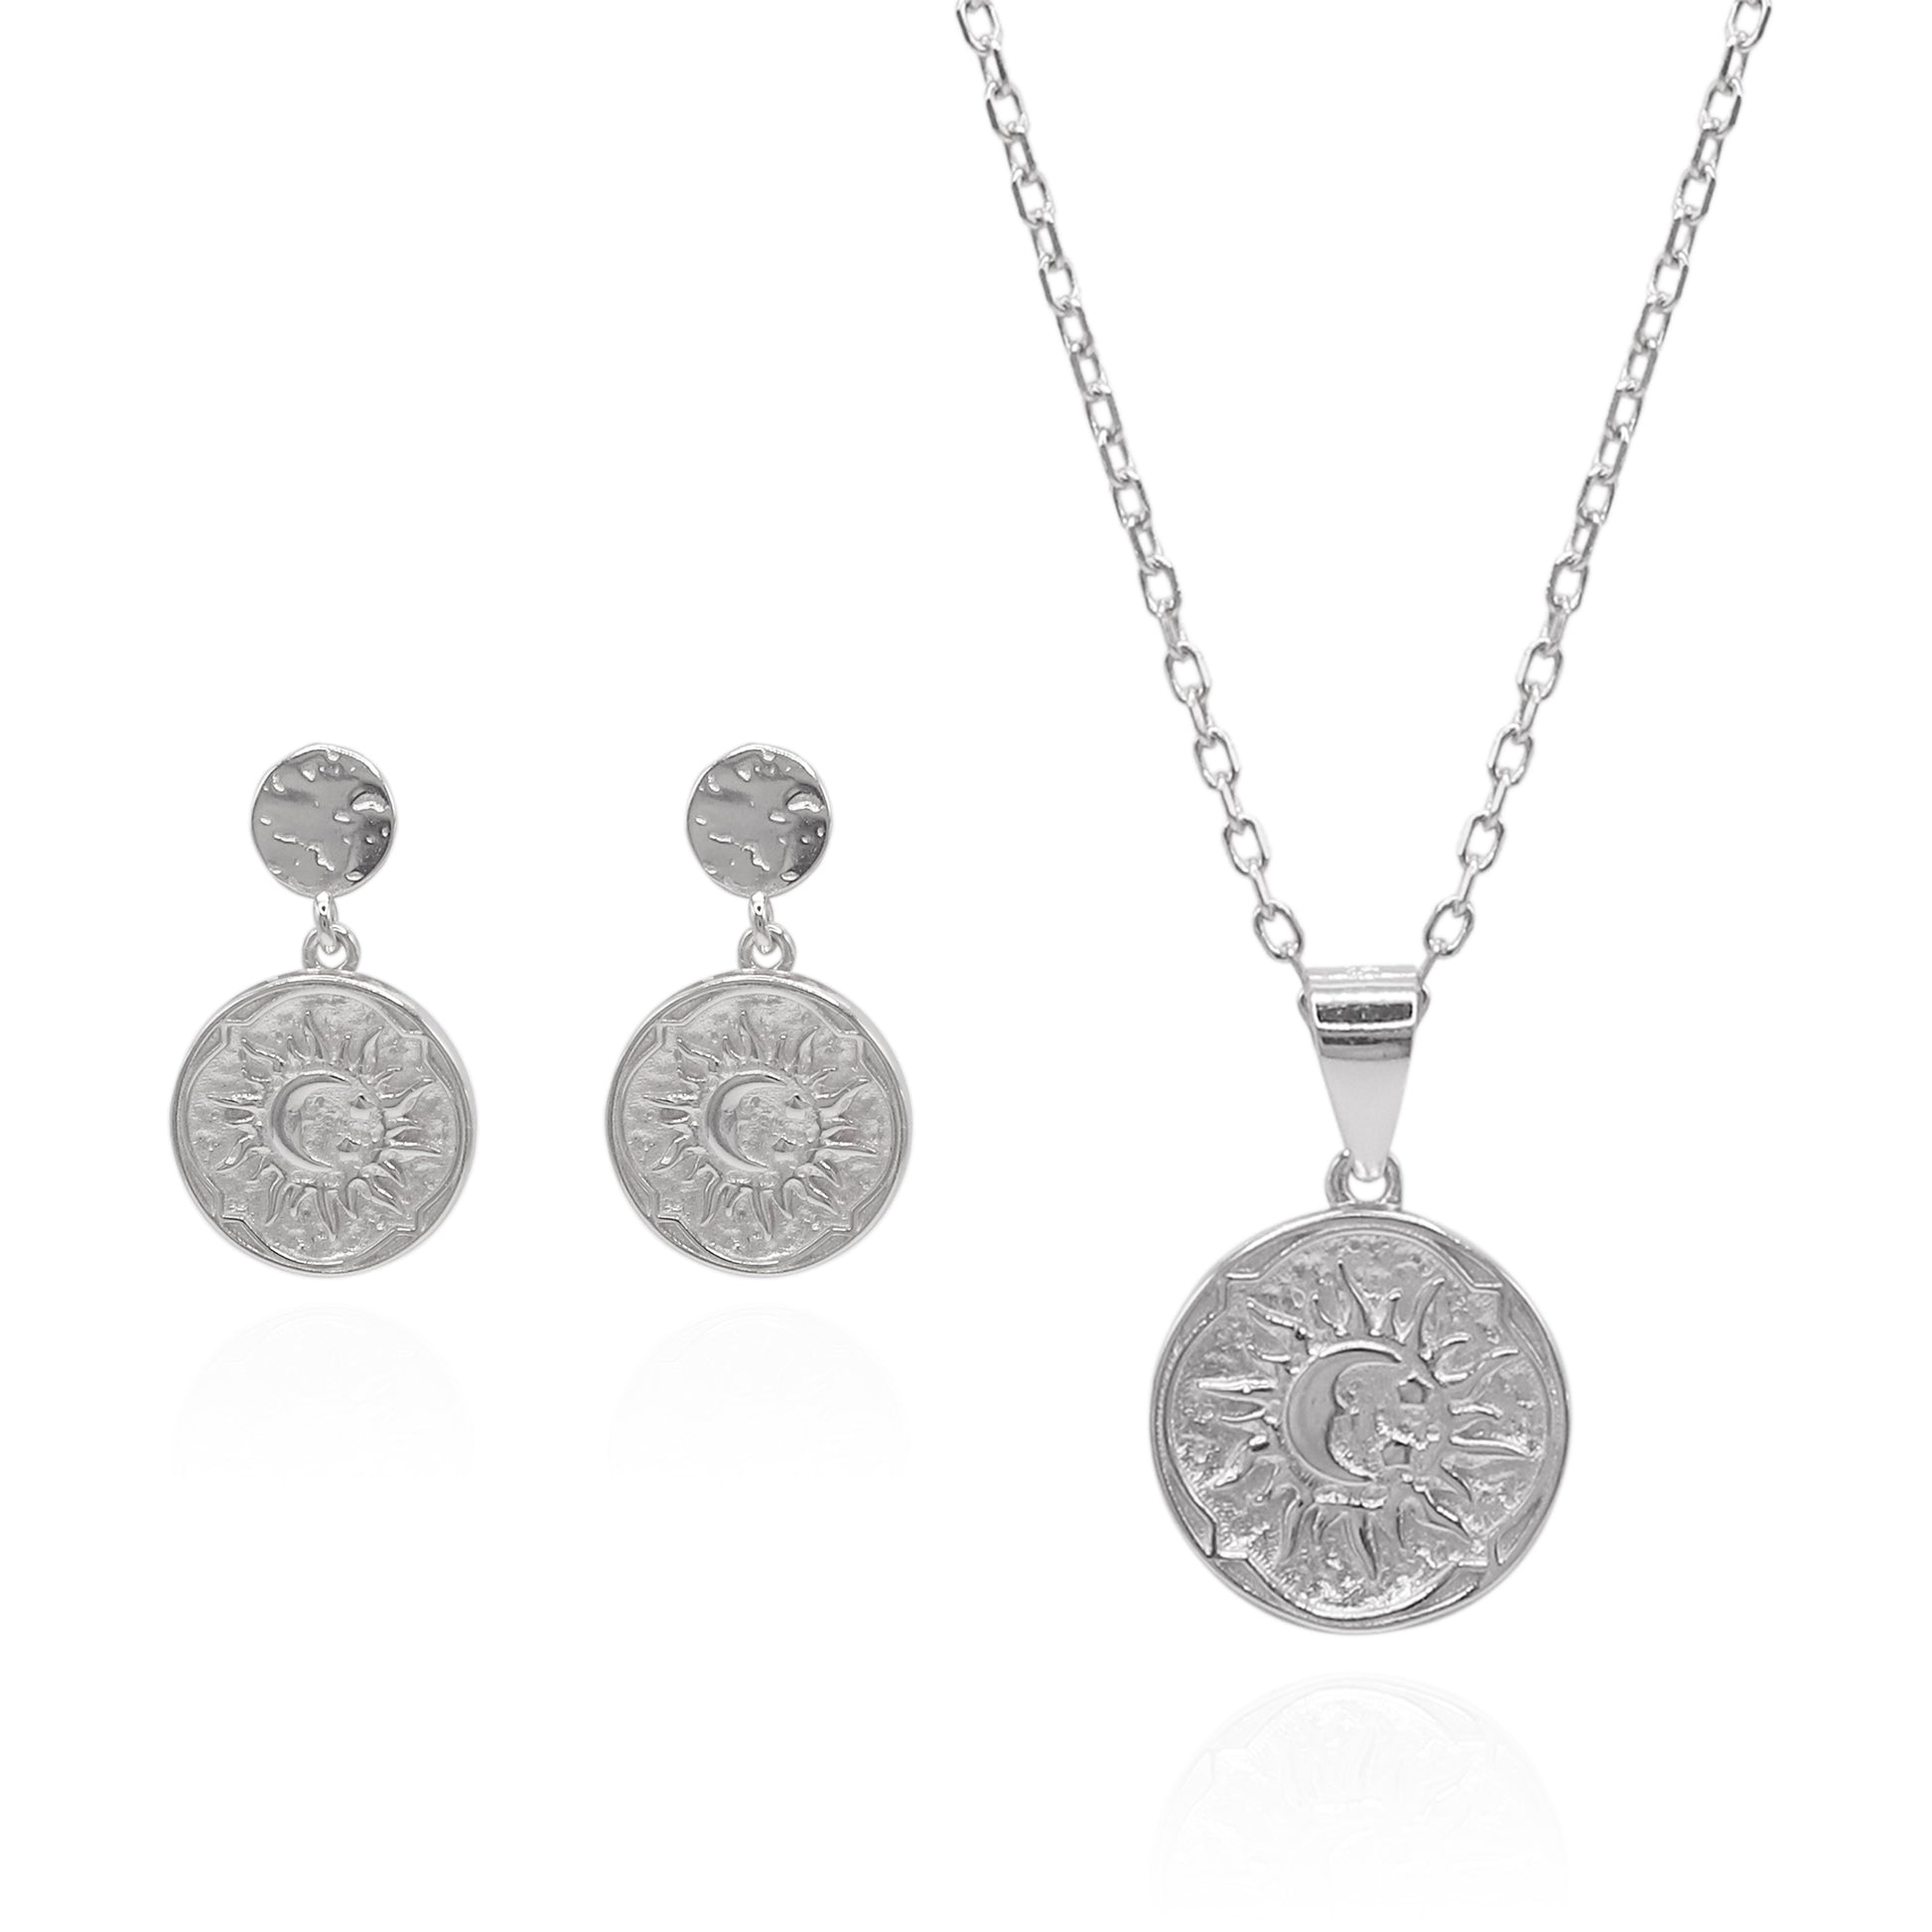 Sun Coin Earring Gift Set | Necklace & Earrings | 925 Sterling Silver